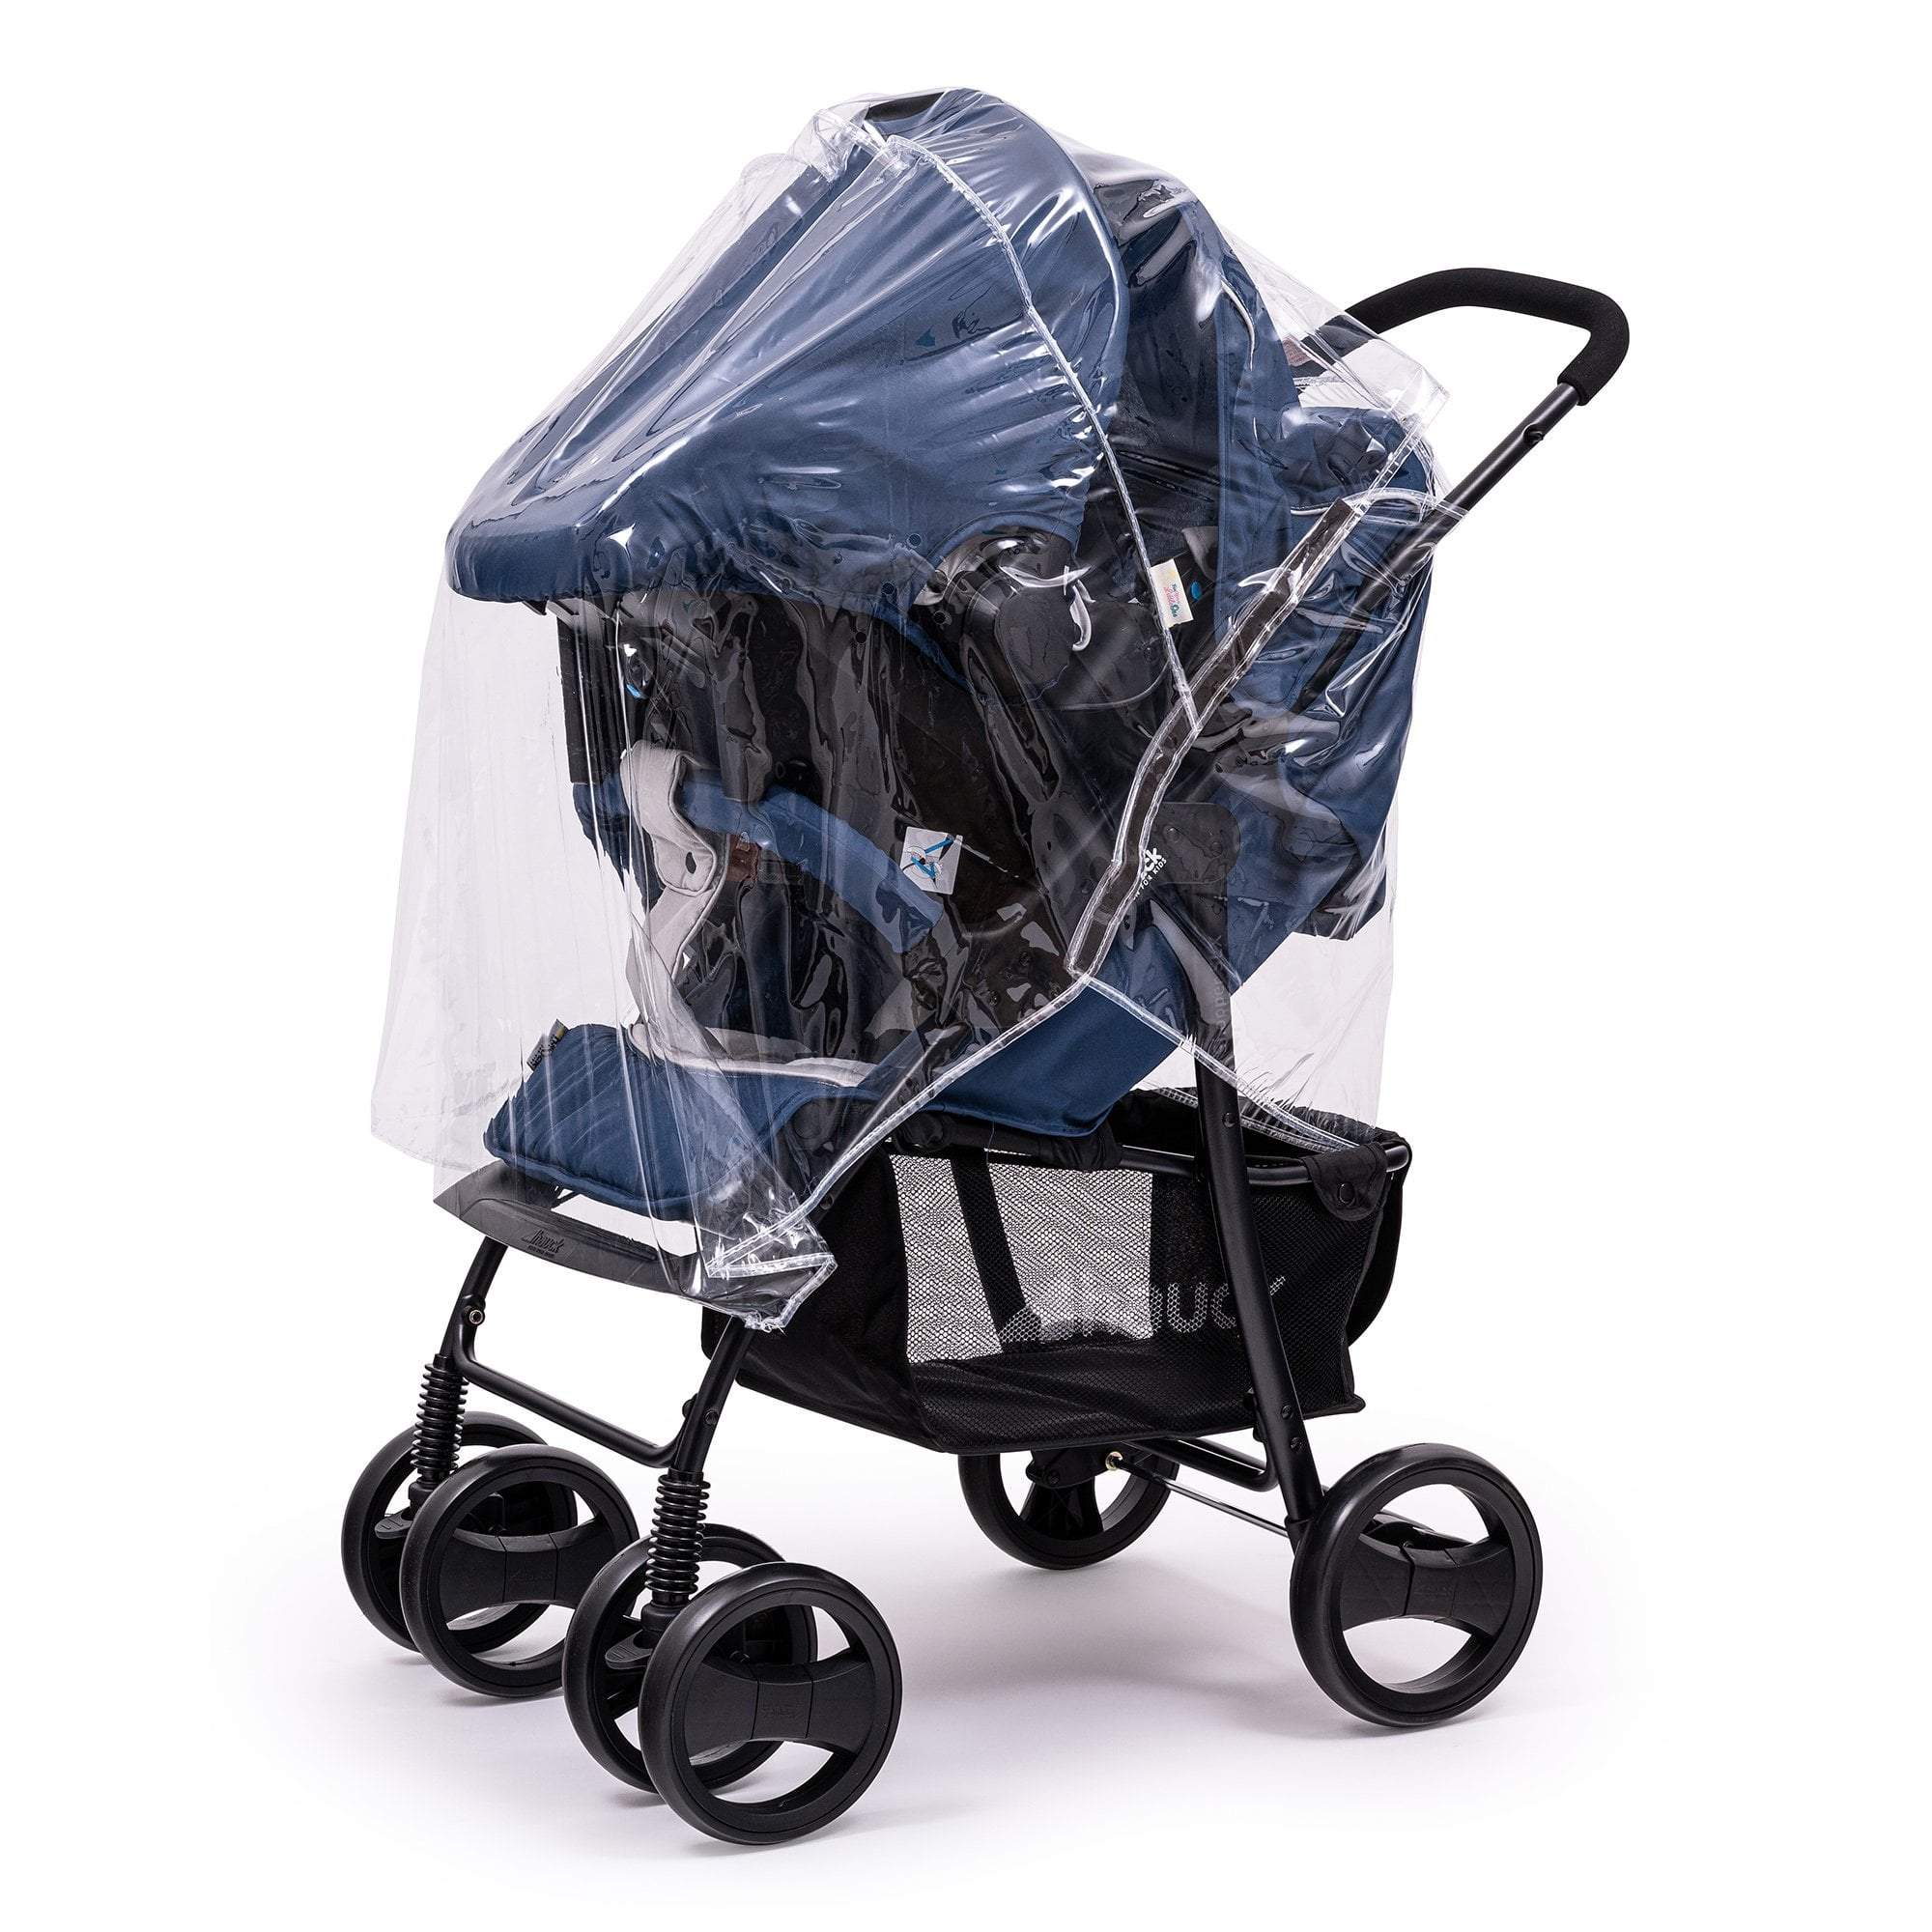 Travel System Raincover Compatible with Koelstra - Fits All Models - For Your Little One